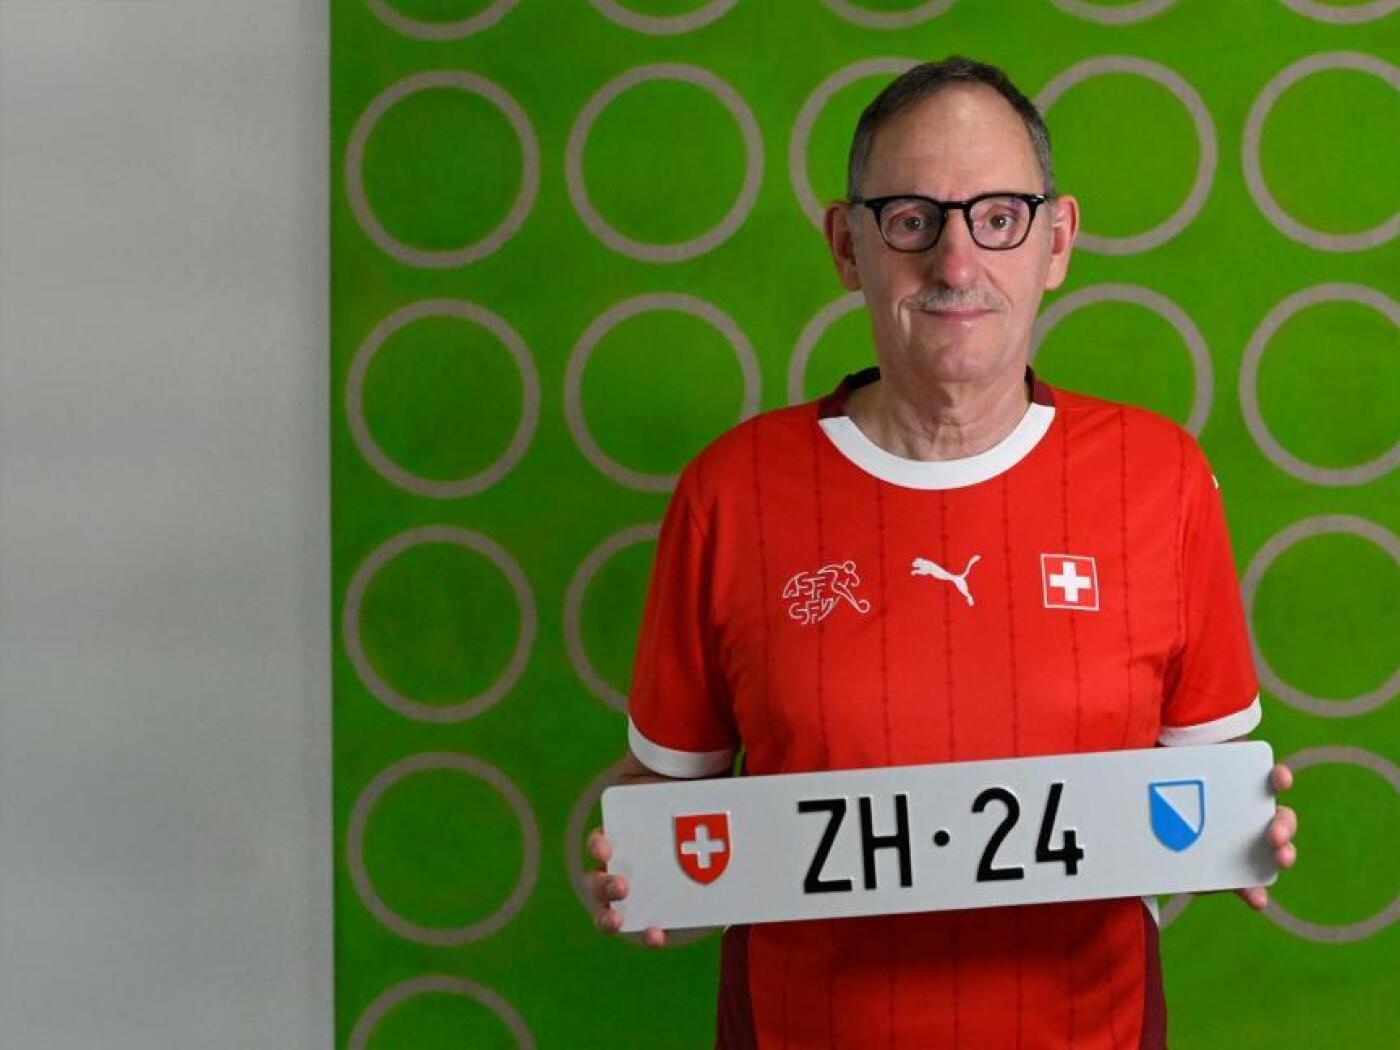 "Andy2" offers 299,000 francs for the "ZH 24" license plate